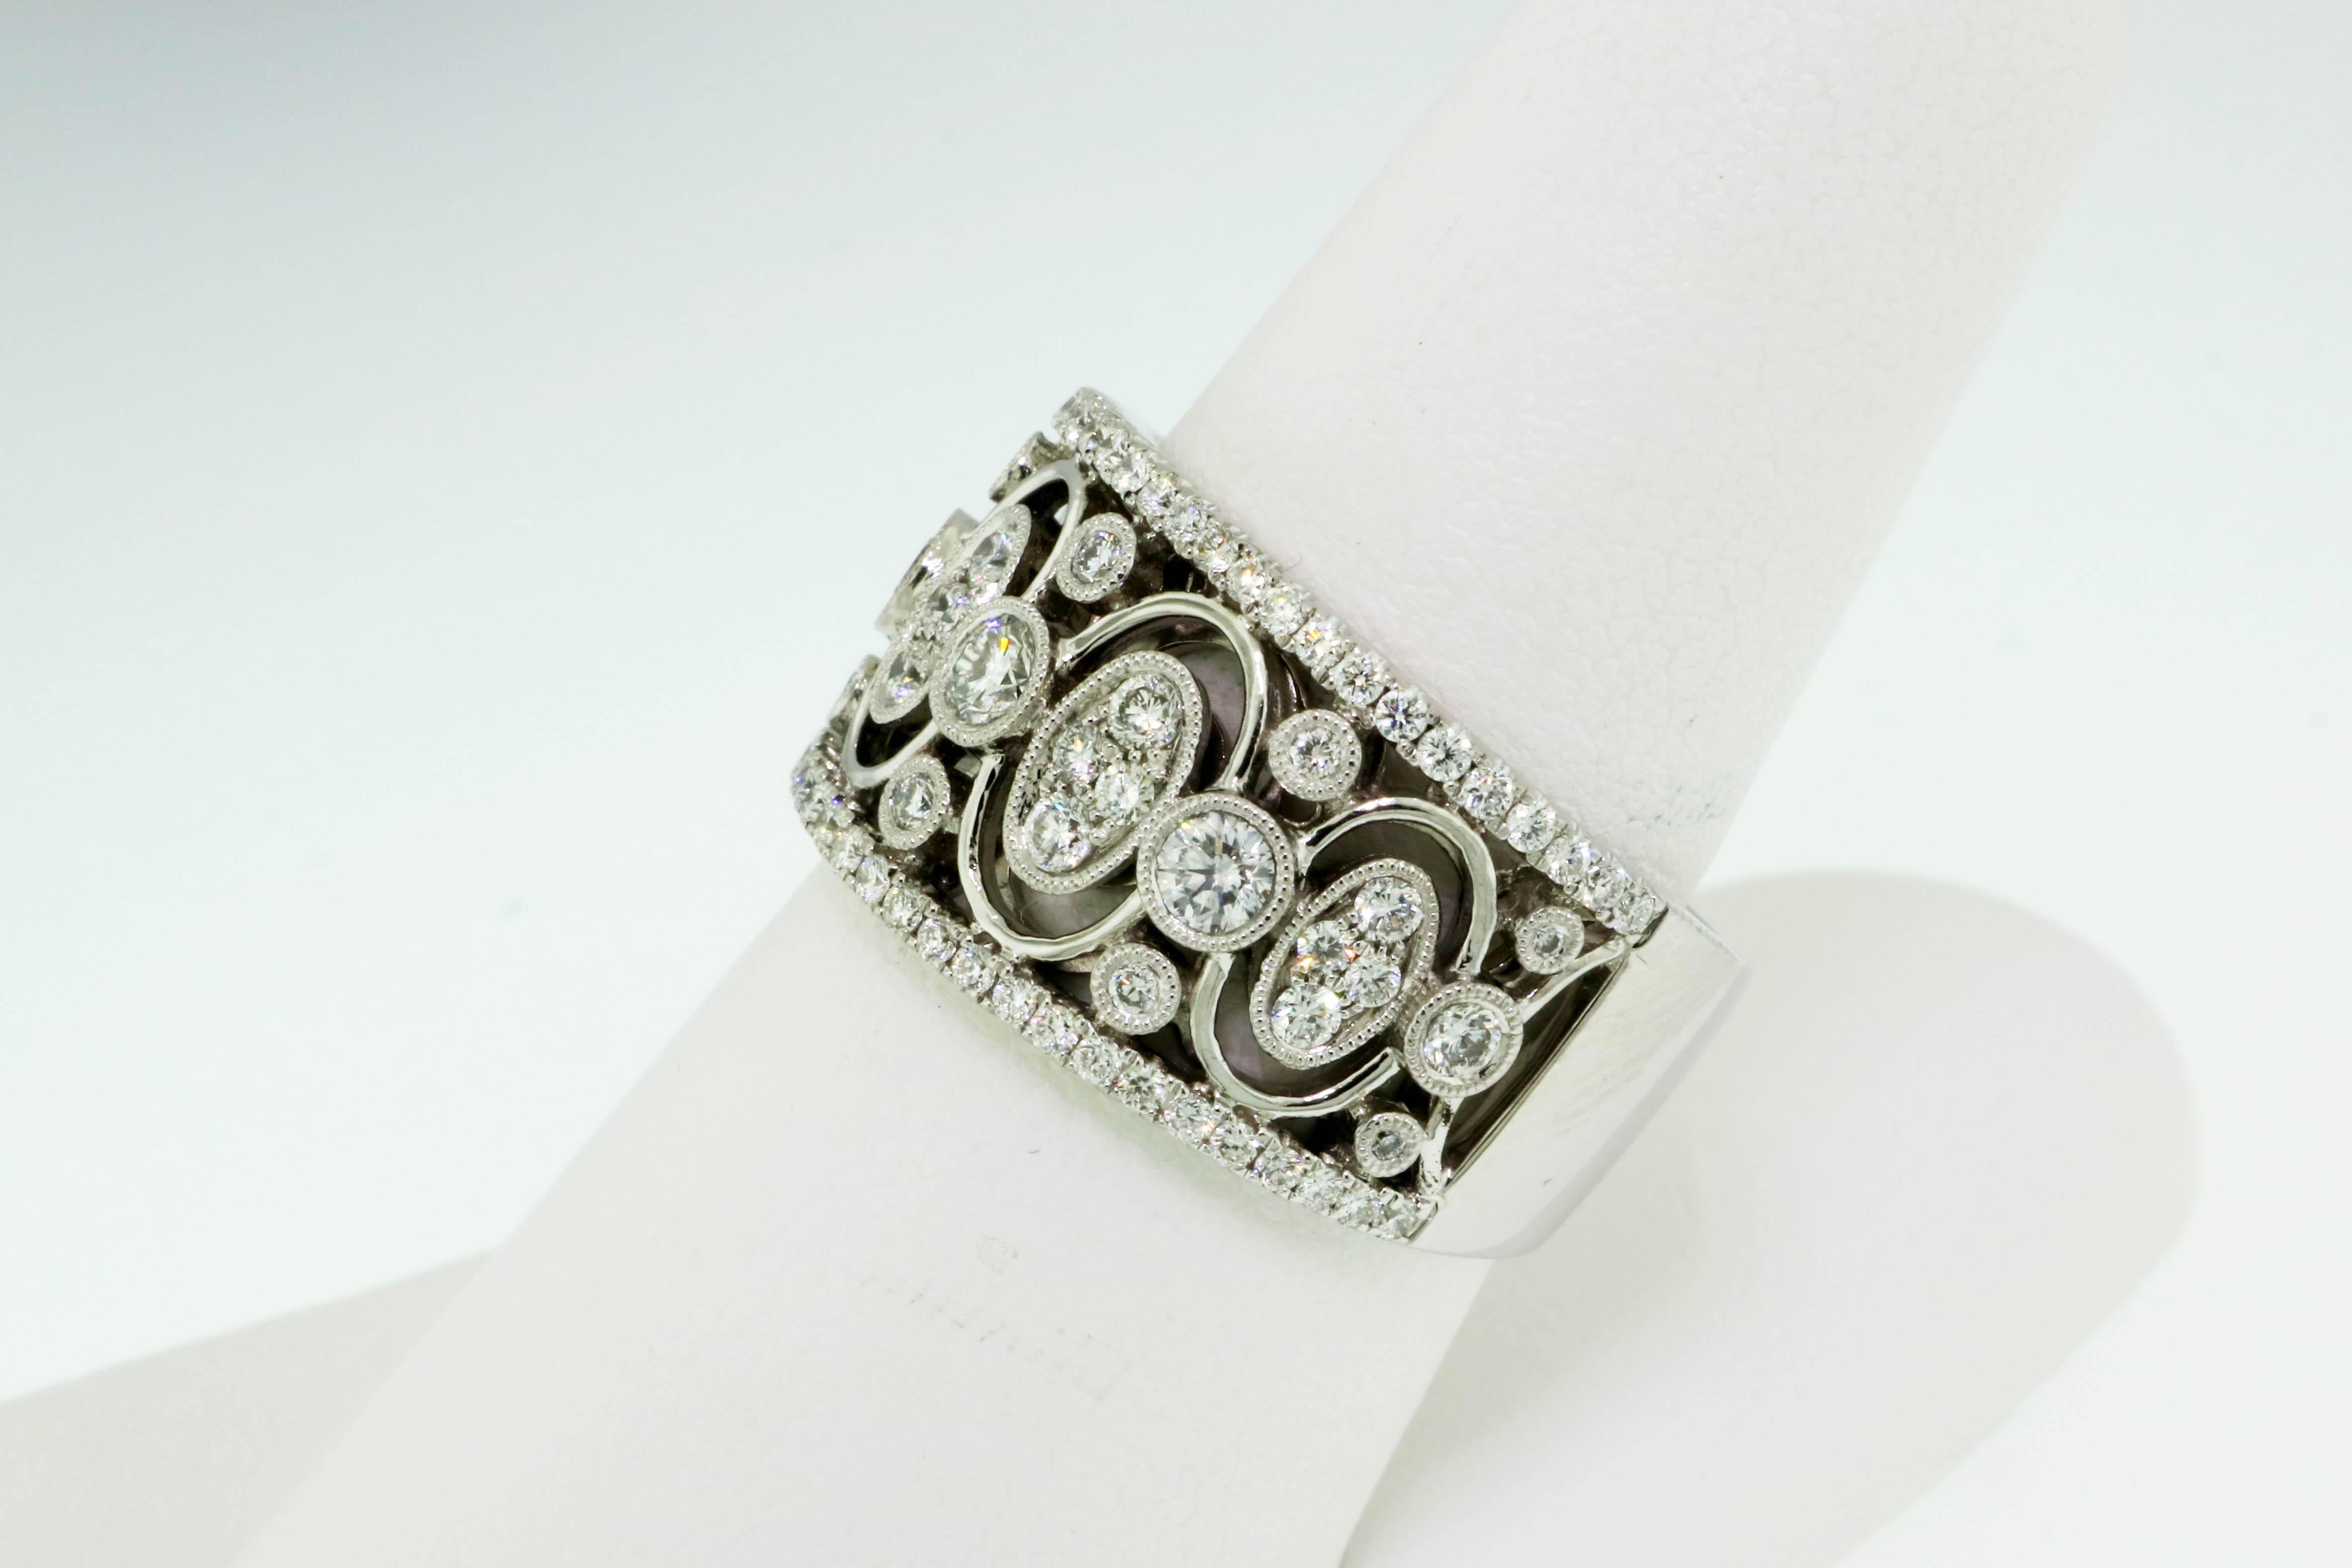 Ring size: 7.75

Incredible Vintage Explorer diamond band ring from jewelry designer, Simon G.. This wide, intricate band ring is filled with Old World elegance and the unique open design fills the finger with sparkle while still remaining delicate.